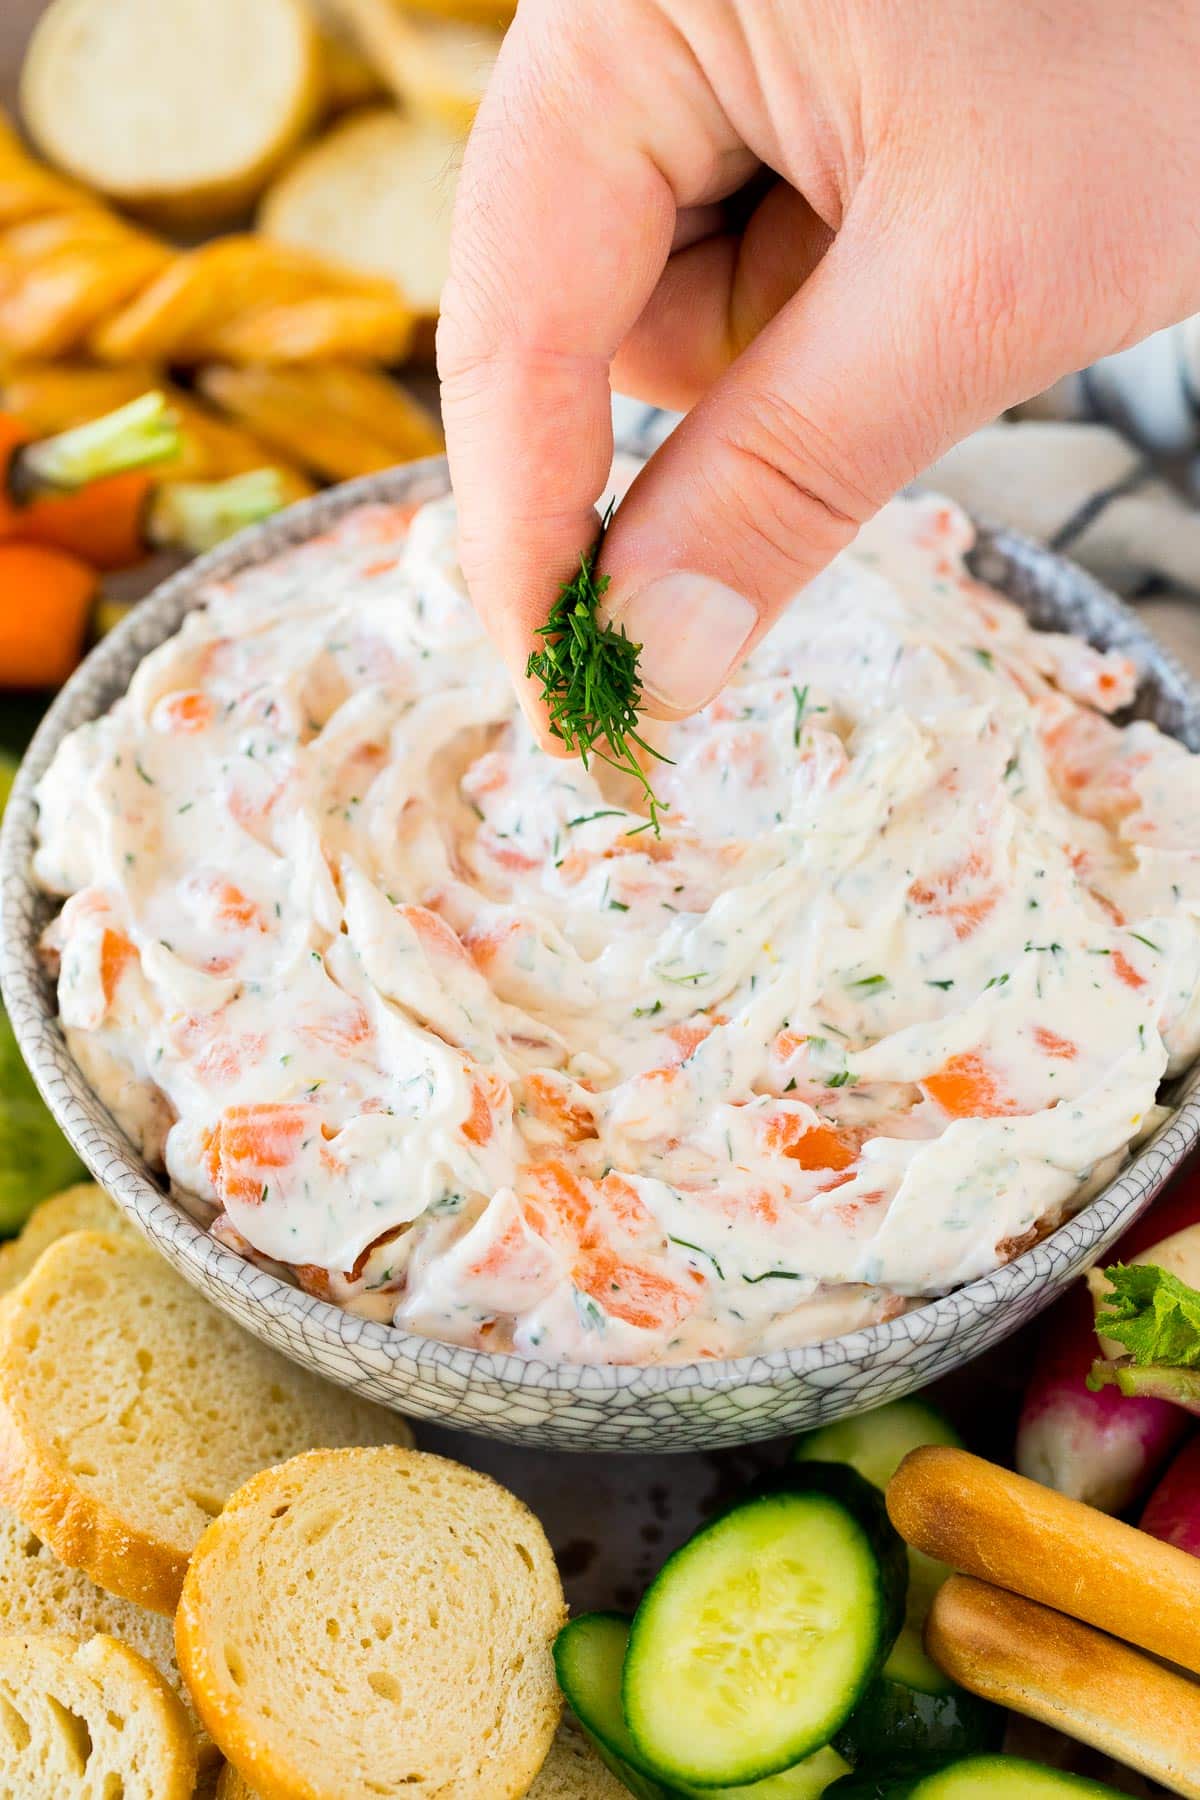 A hand garnishing the creamy appetizer with fresh dill.